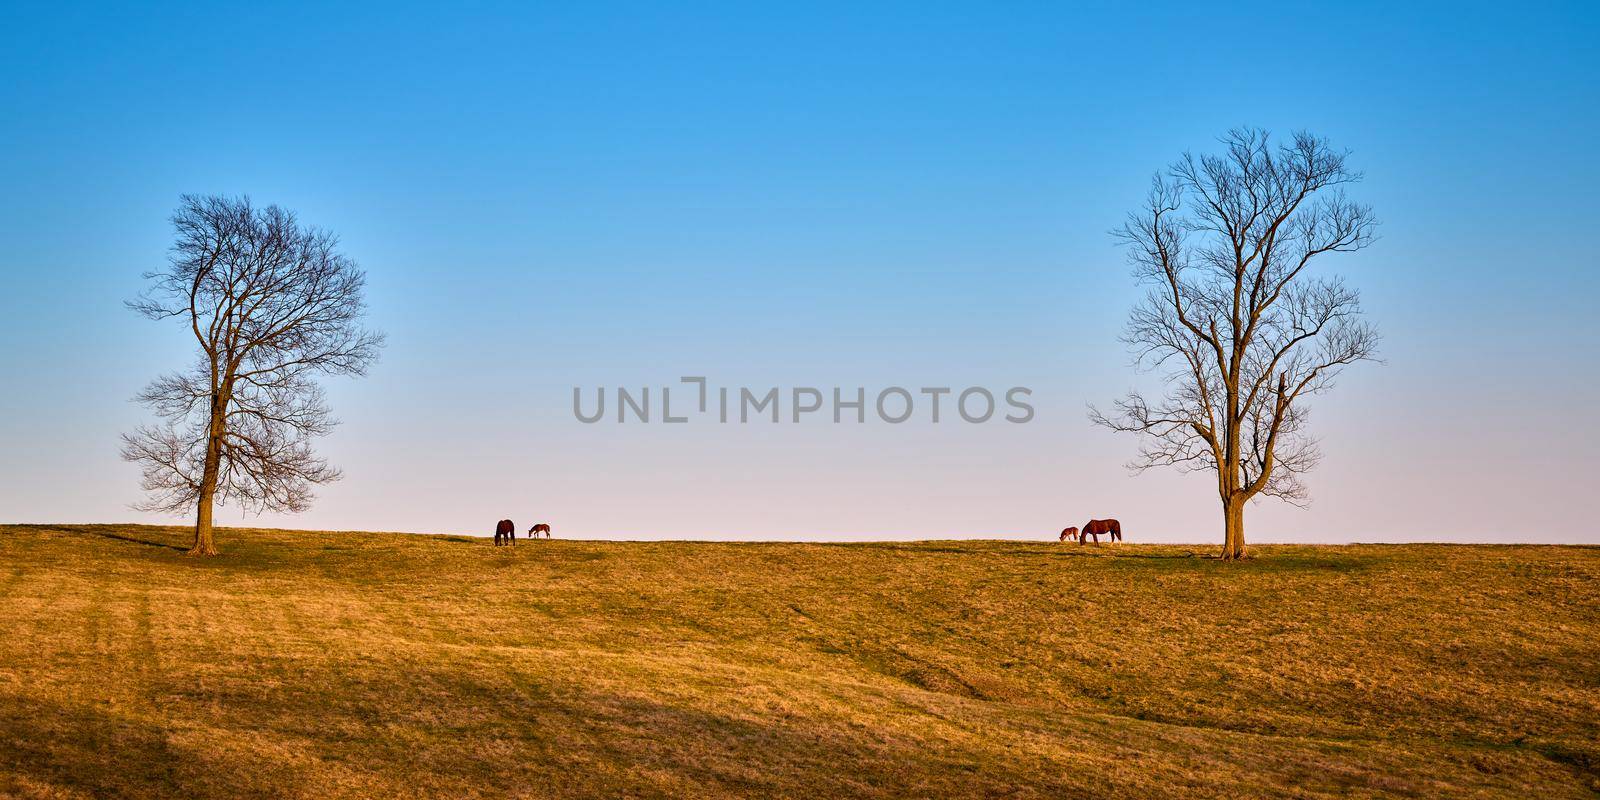 A pair of mares and foals grazing on early spring grass.